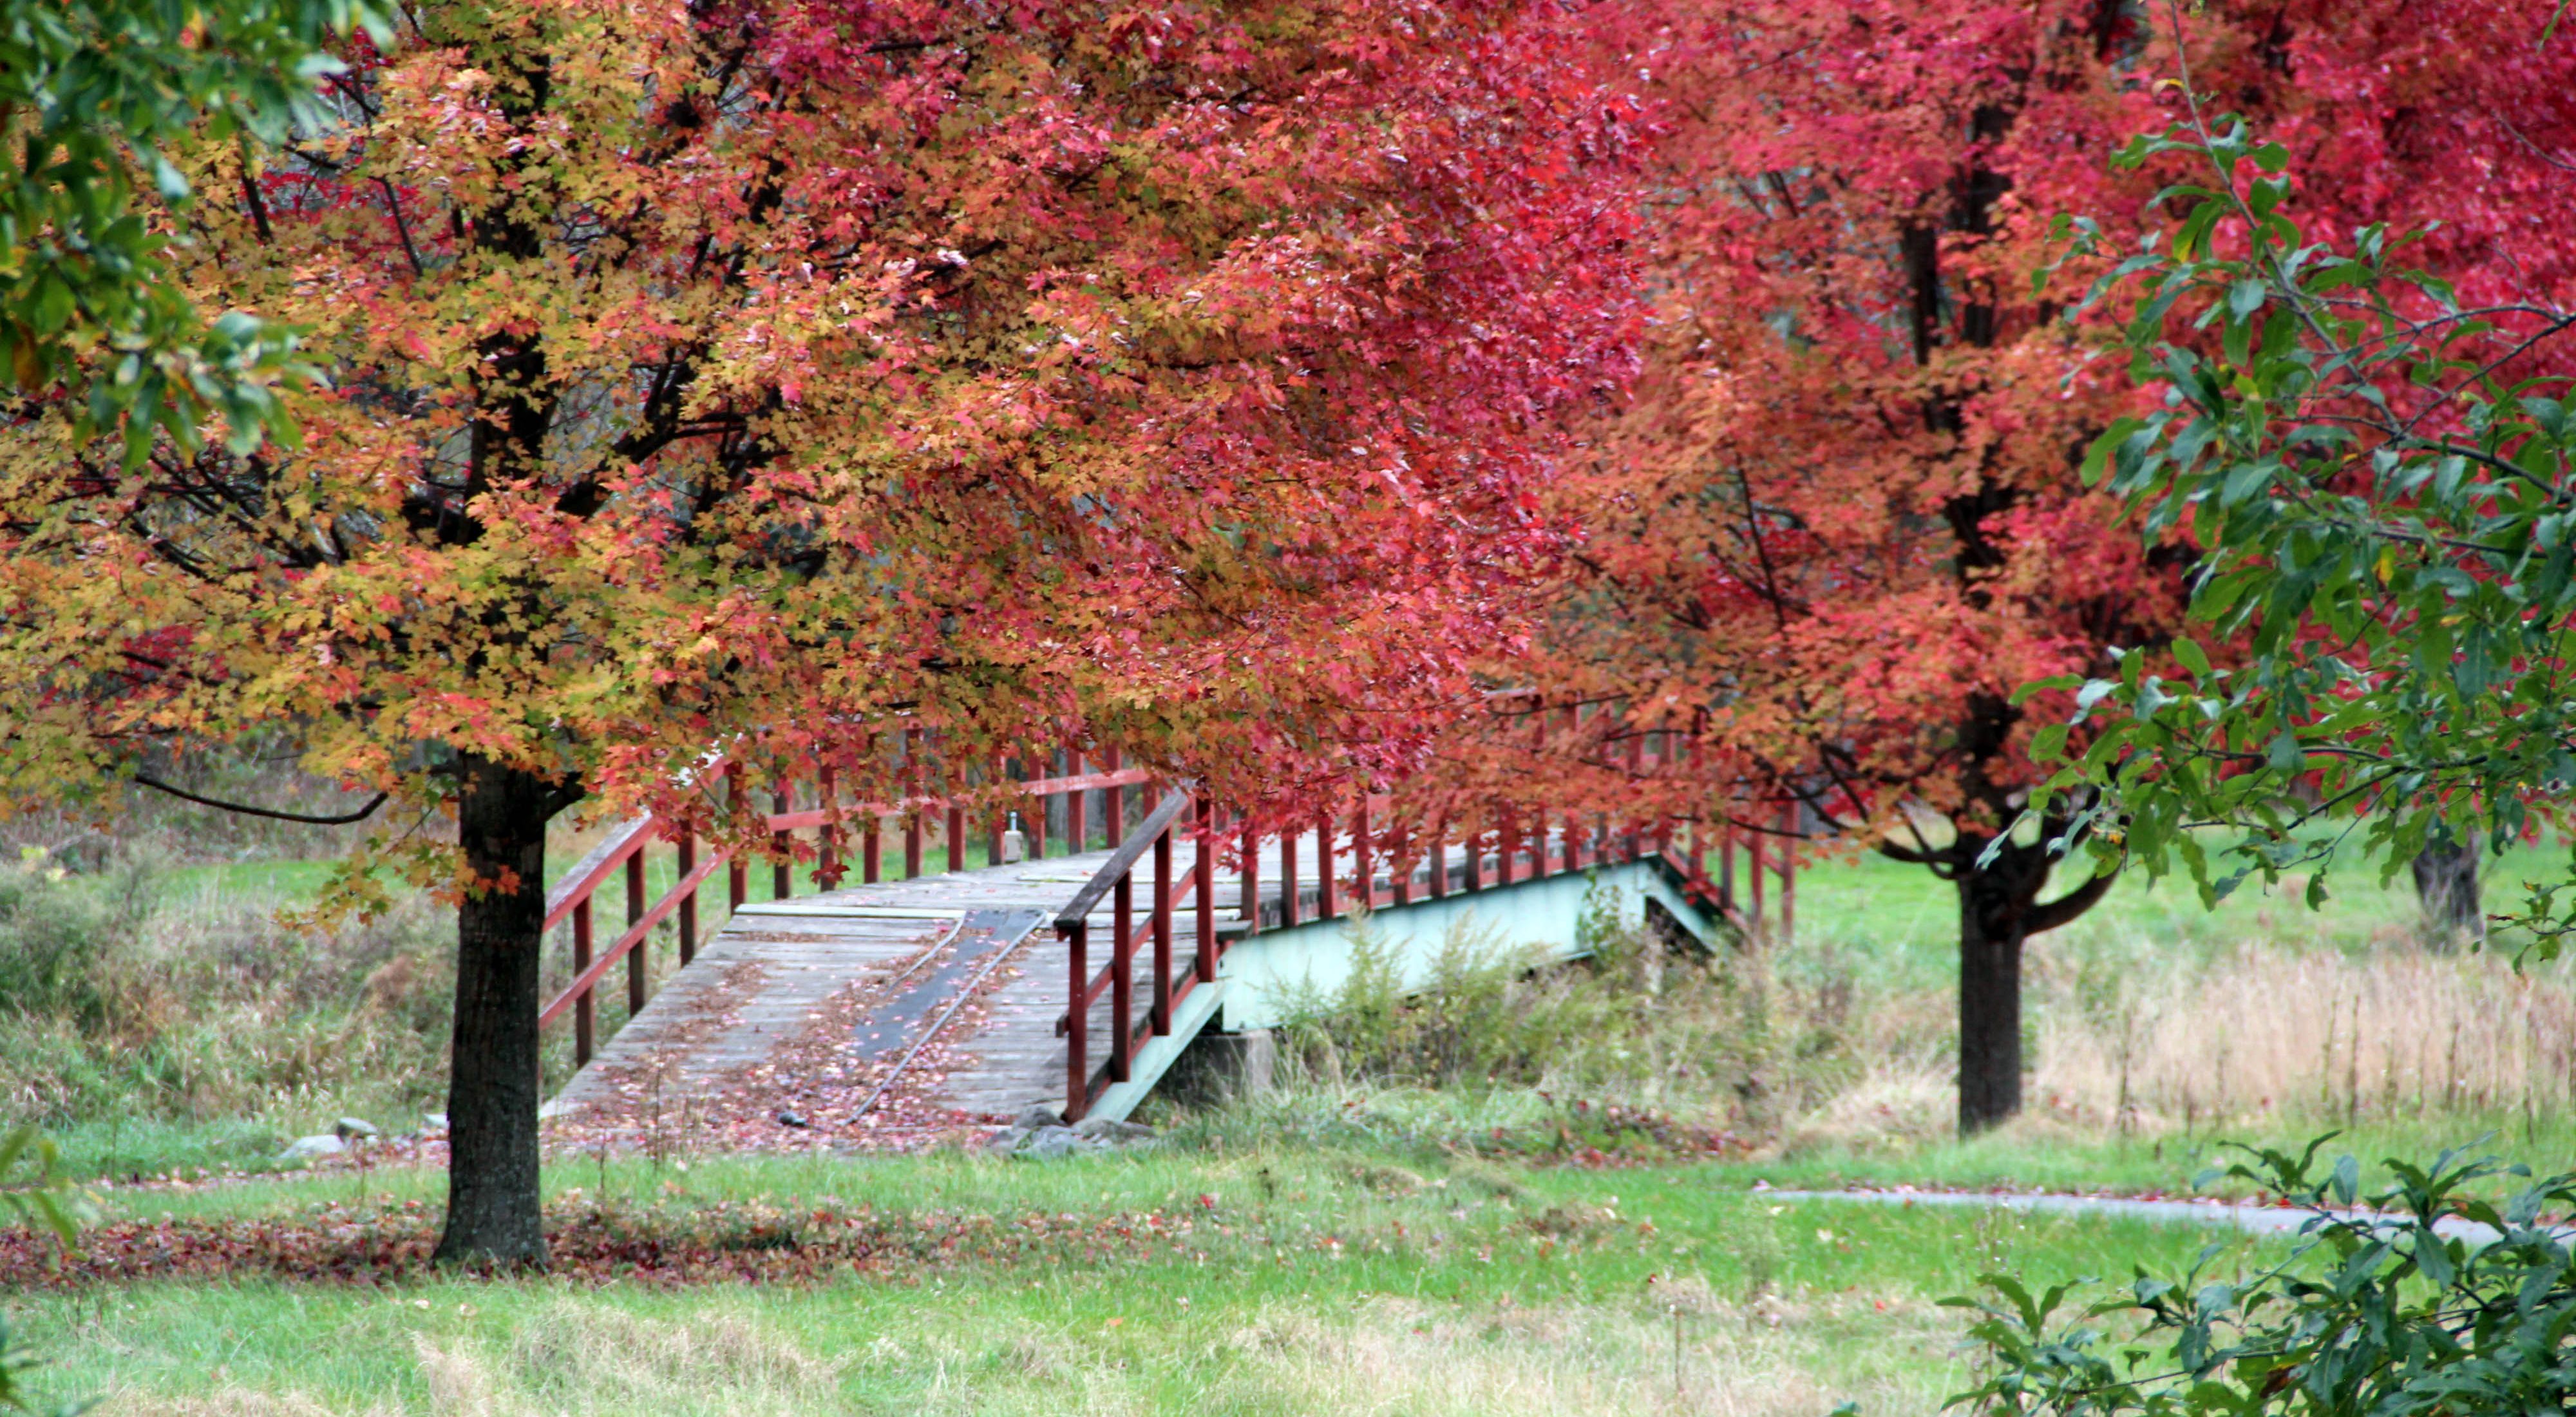 A wide, leaf strewn wooden foot bridge crosses a narrow creek. Two tall maple trees stand in front of the bridge showing brilliant red fall colors.